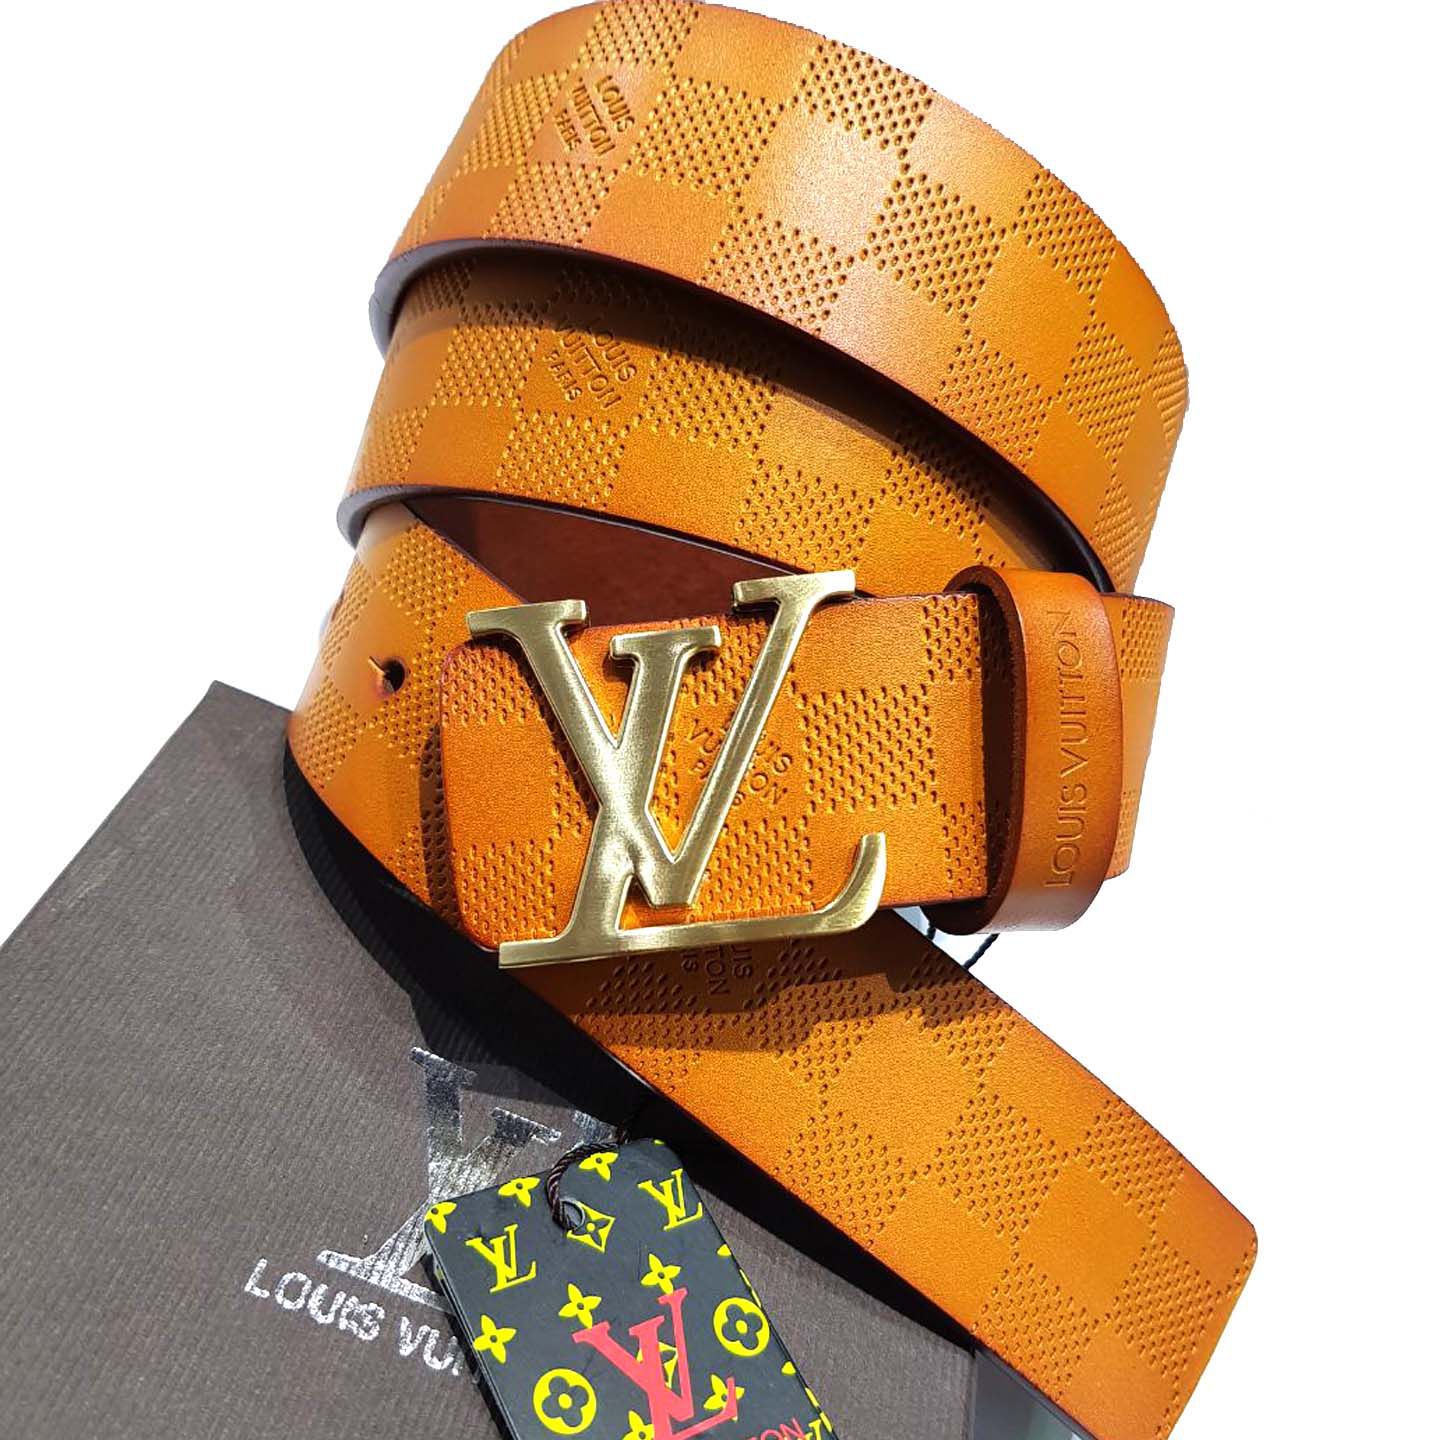 LV Belt Tan Leather Party Belt: Buy Online at Low Price in India - Snapdeal